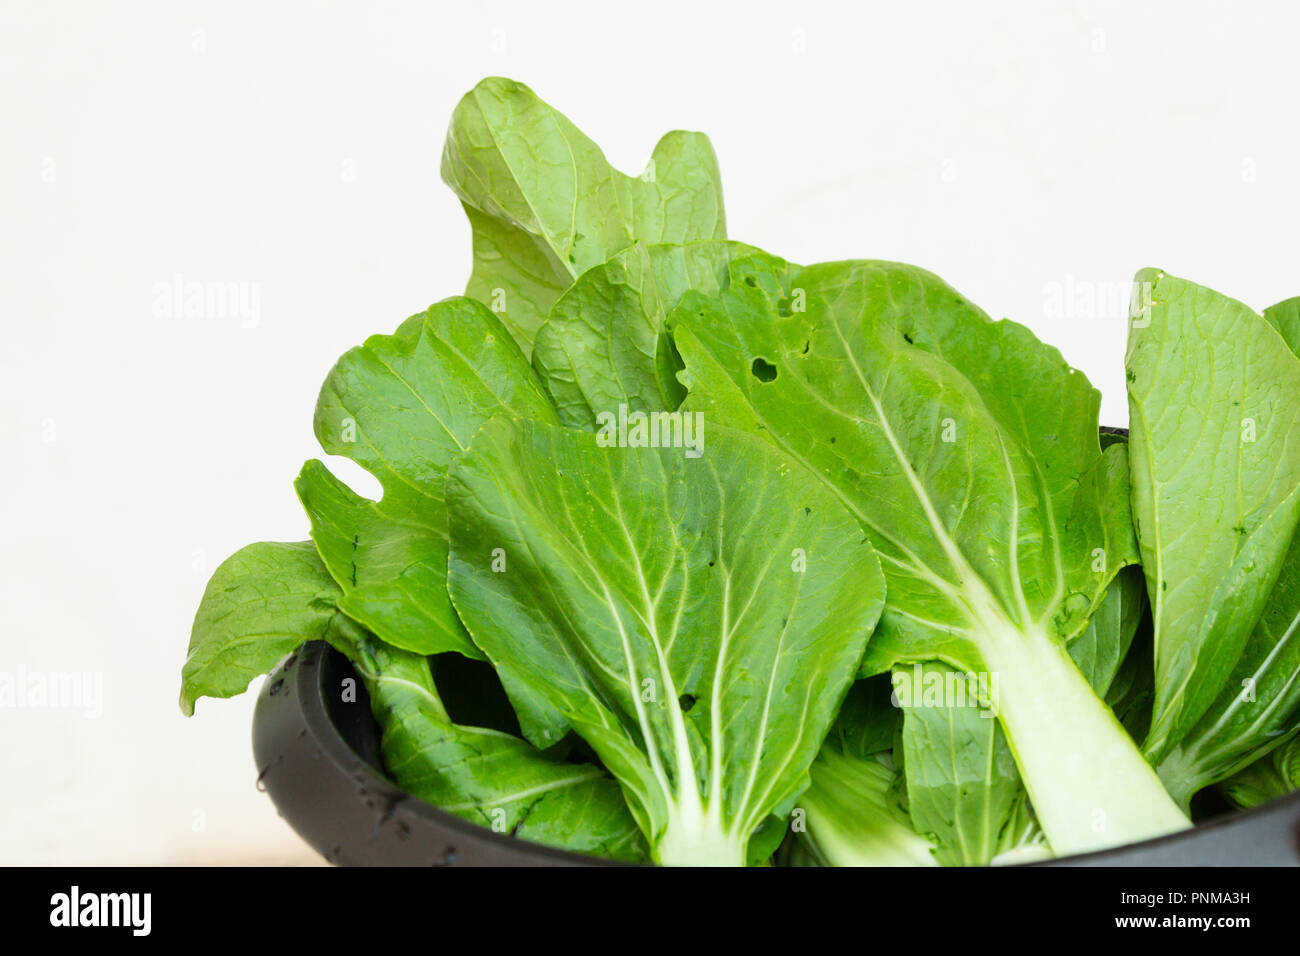 Baby bok choy, pak choi or pok choi (Brassica rapa subsp. chinensis), type of Chinese cabbage, vegetables fresh washed in metal bowl on sink Stock Photo